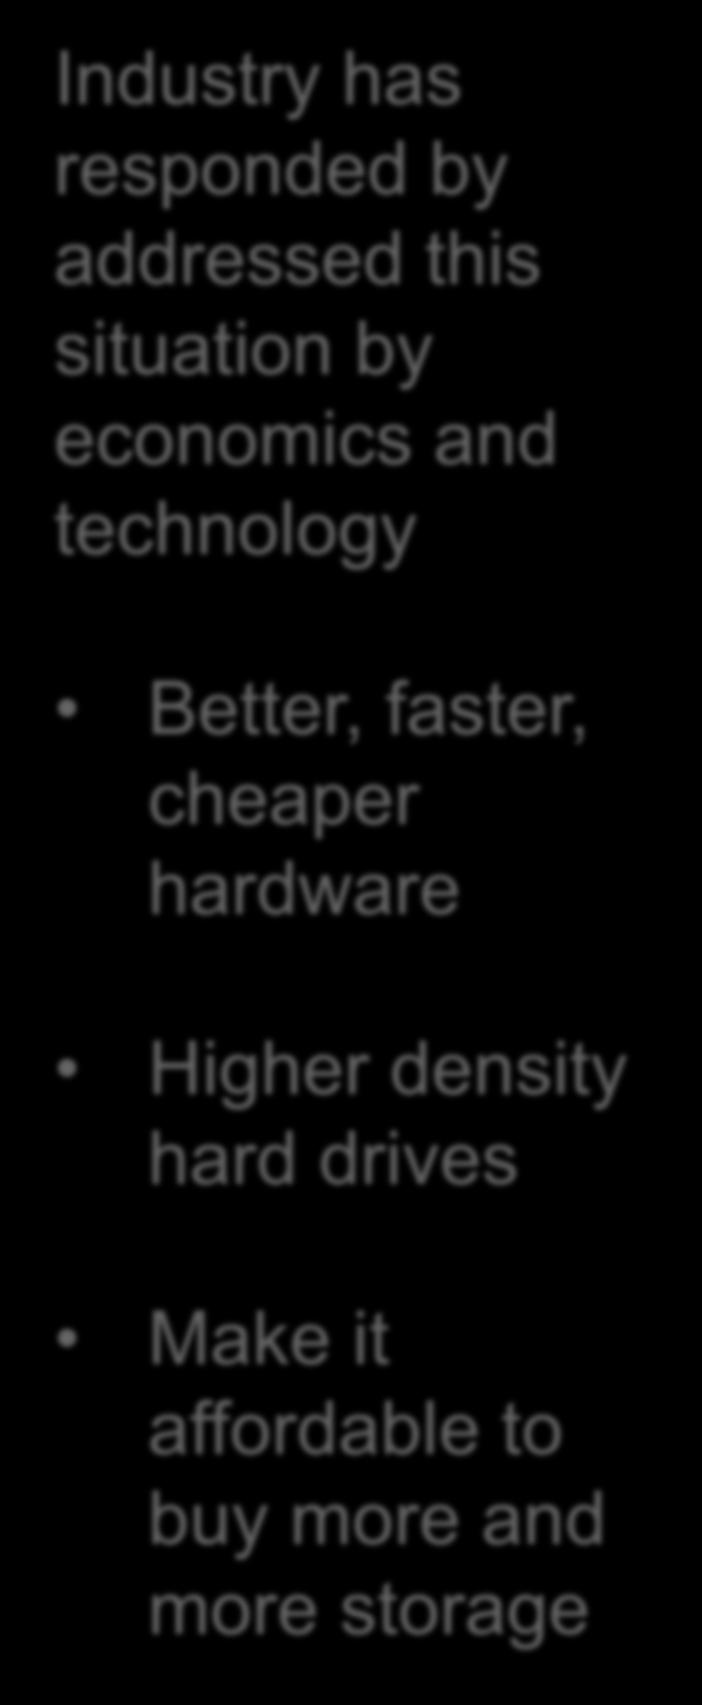 Production Data o Better, faster, p cheaper y hardware 6 4 2 0 Storage Explosion